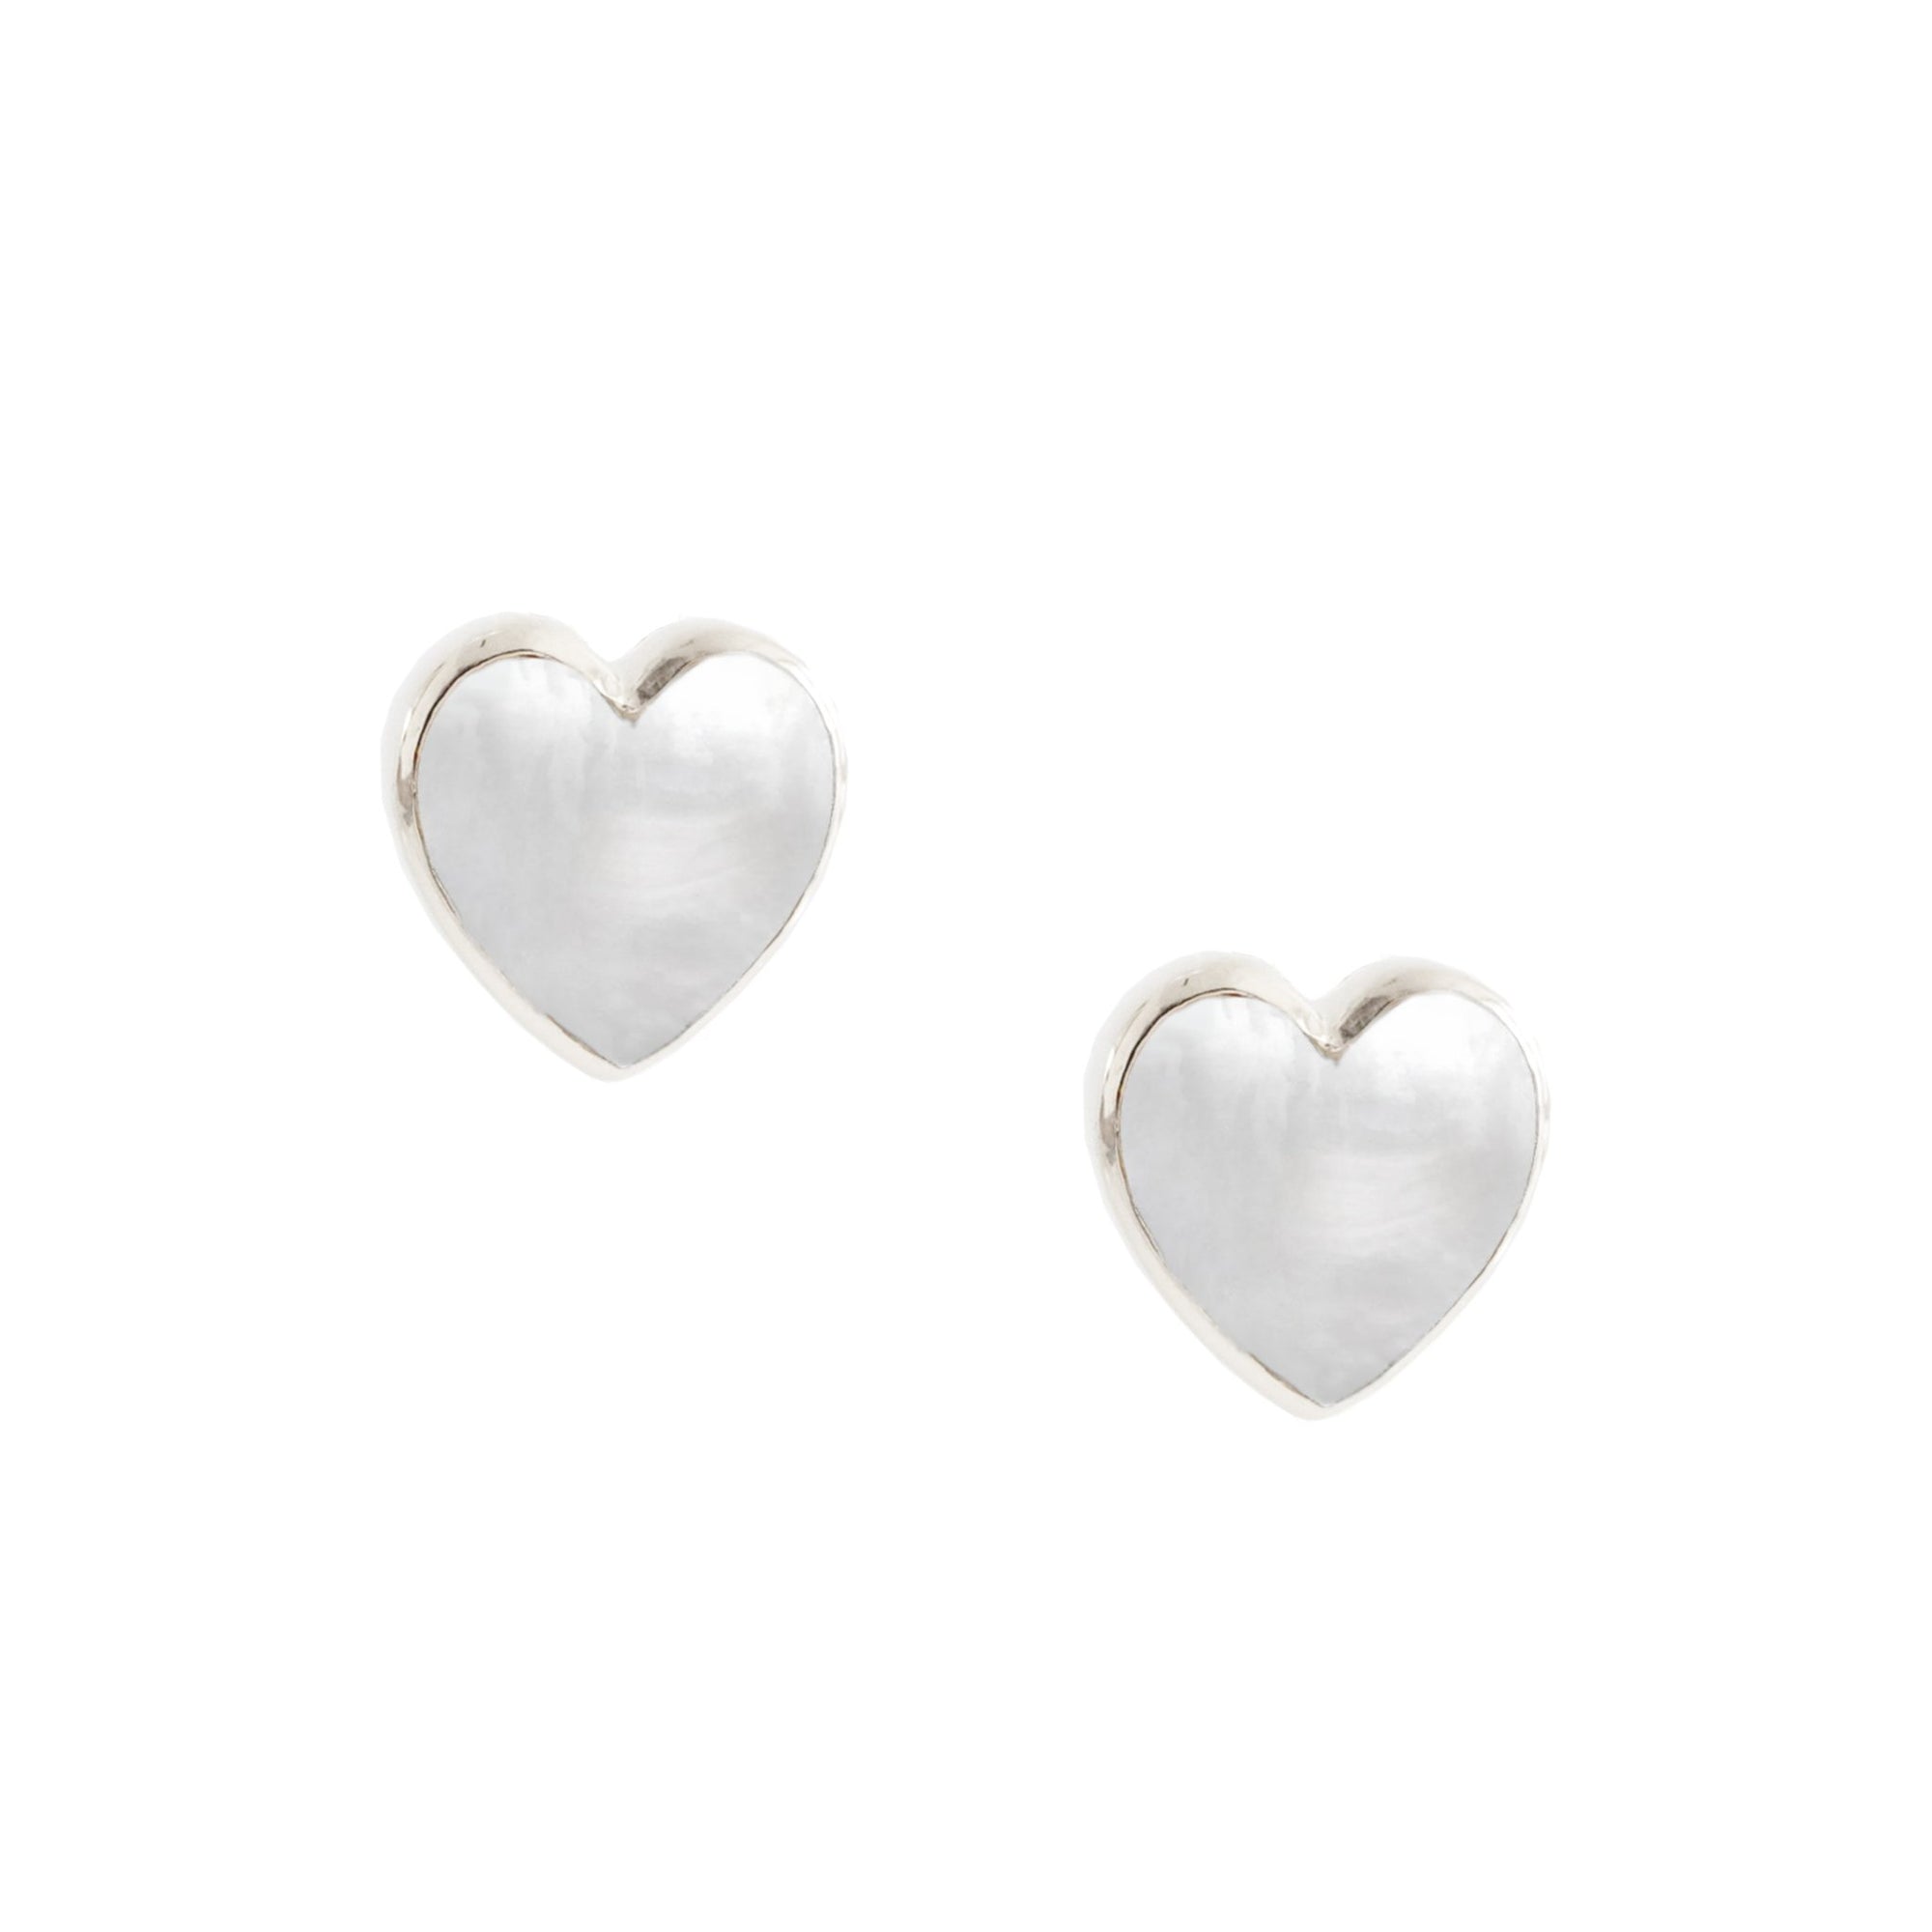 FRAICHE INSPIRE SWEETHEART STUDS - MOTHER OF PEARL & SILVER - SO PRETTY CARA COTTER